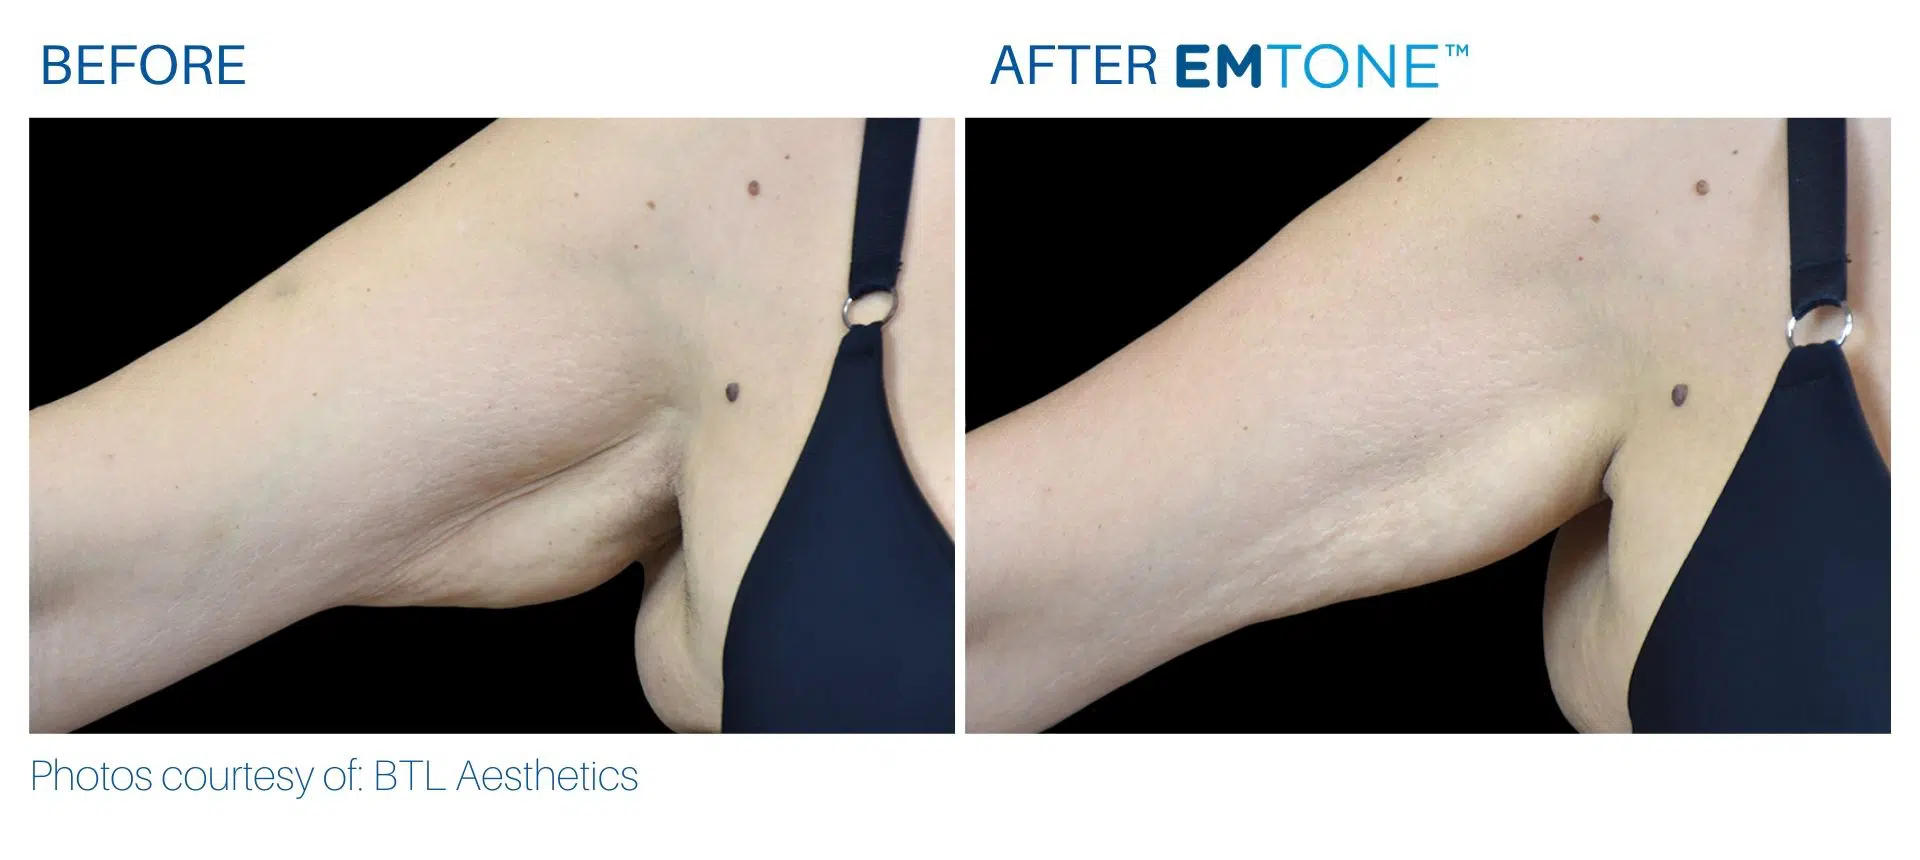 Emtone arms before and after result BodyMorphMD.